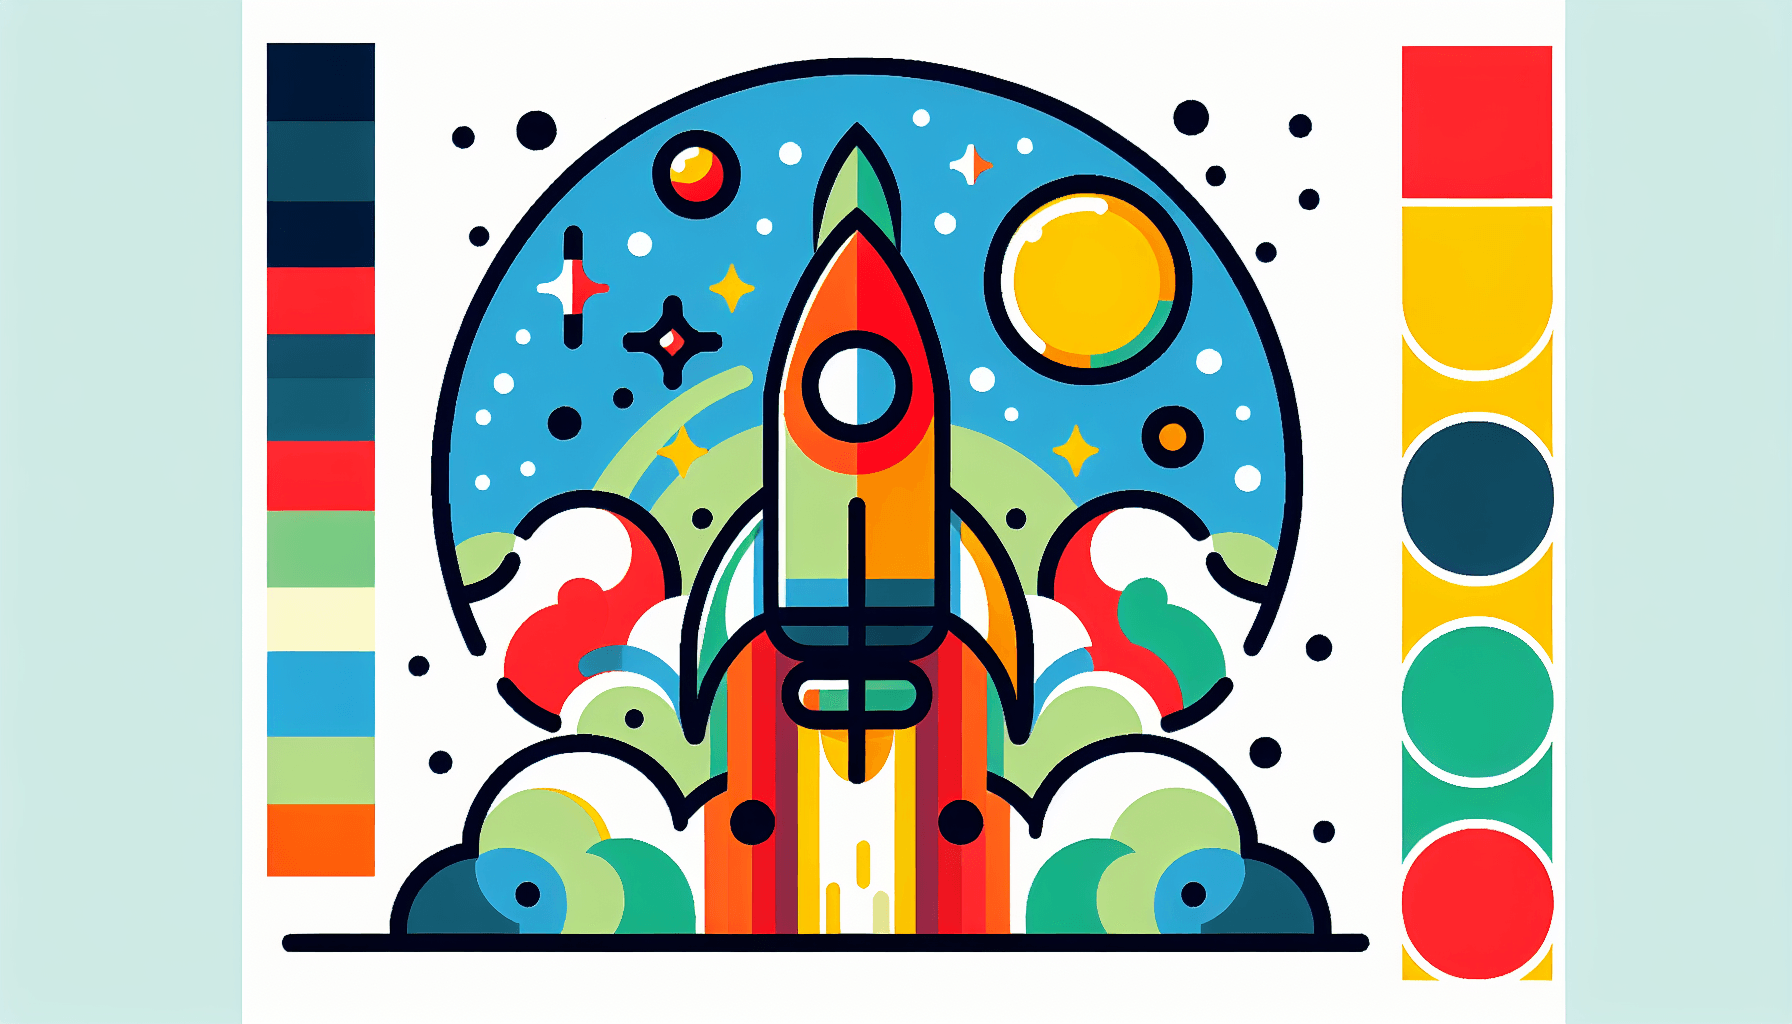 Rocket in flat illustration style and white background, red #f47574, green #88c7a8, yellow #fcc44b, and blue #645bc8 colors.